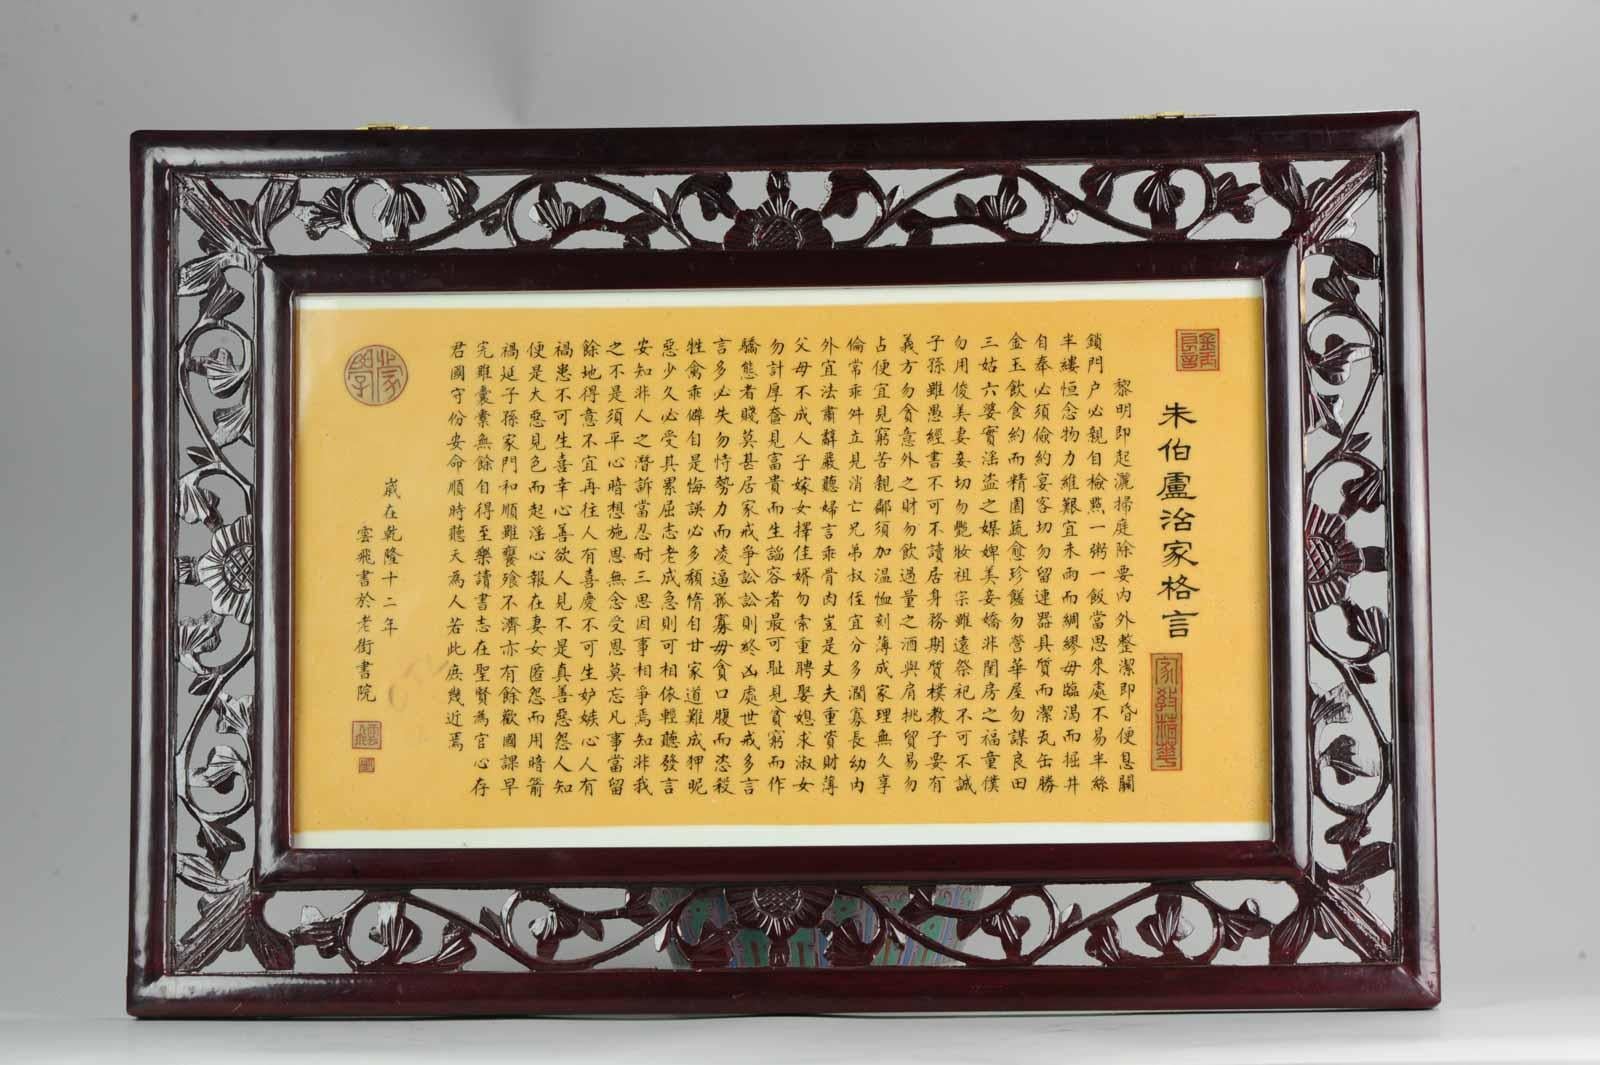 Porcelain plaque in nice wooden frame, depicting the family rules of Zhuzi. Bought in Hong Kong in 1995

11-10-19-16-4

The plaque will be sent with track and trace, safely packed and insured.

 

 
Condition:
Overall condition perfect; no